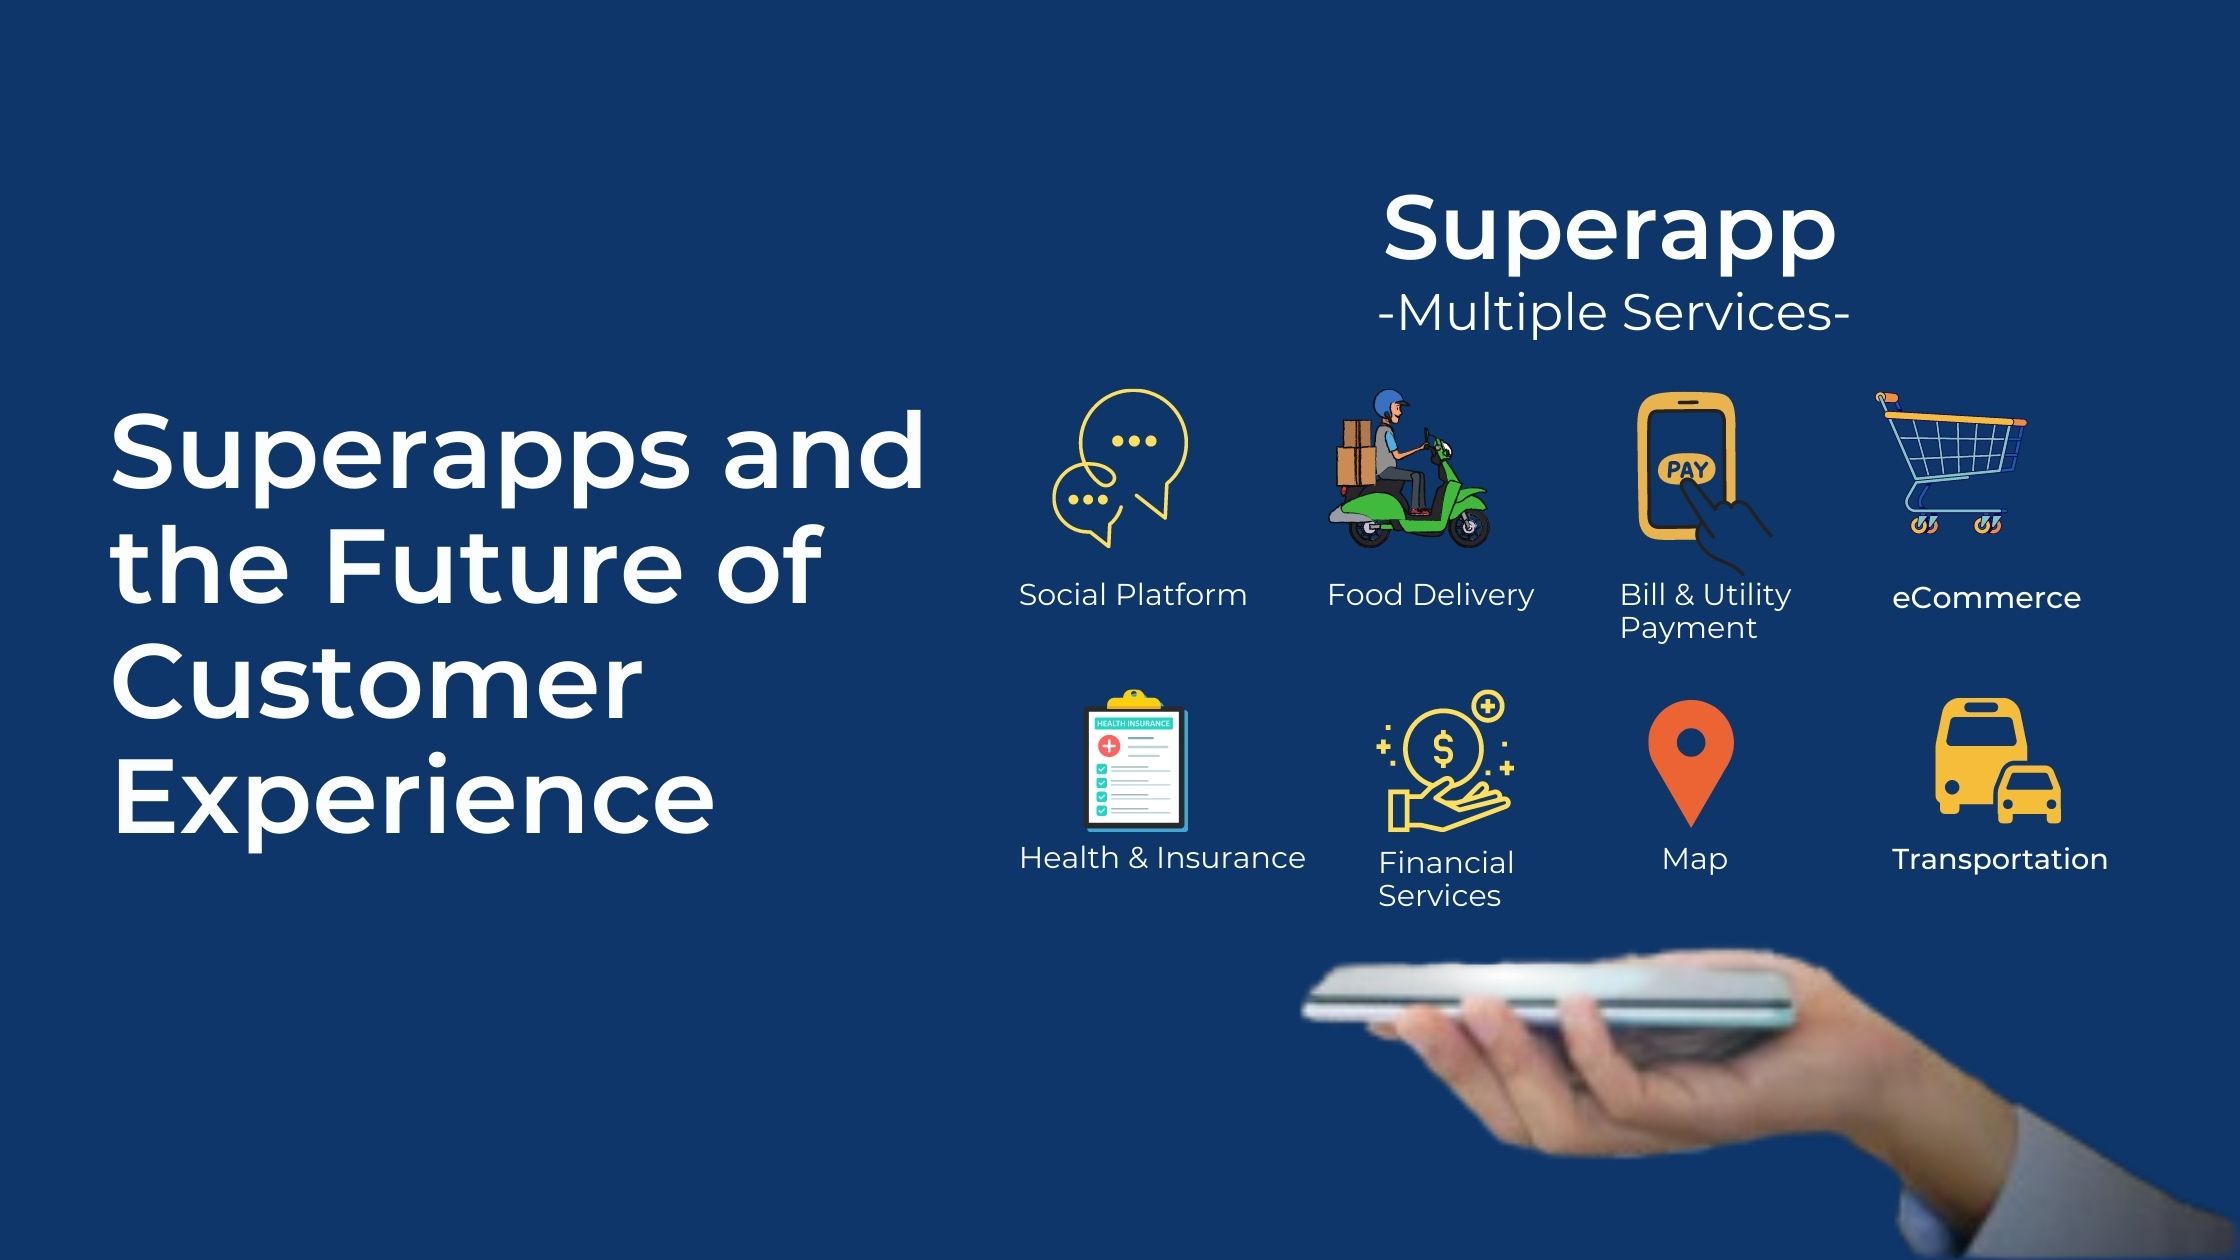 The graphic showcases a futuristic blend of app icons and interconnected pathways, symbolizing the interconnected and seamless customer experience discussed in the document. It hints at the comprehensive insights into the emerging trend of superapps and their impact on the future of customer interactions.